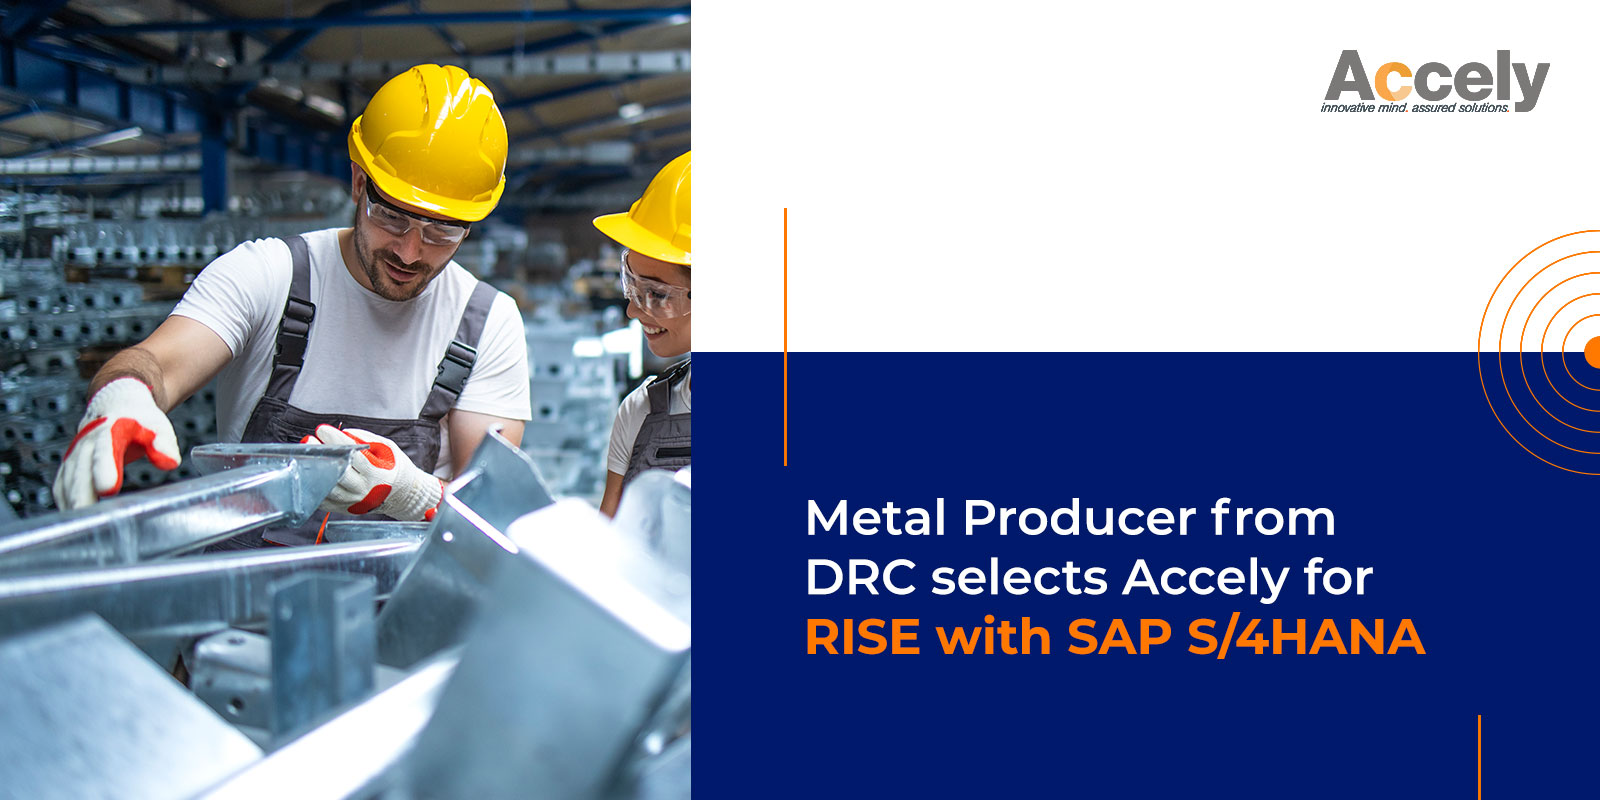 Metal Producer from DRC selects Accely for RISE with SAP S/4HANA